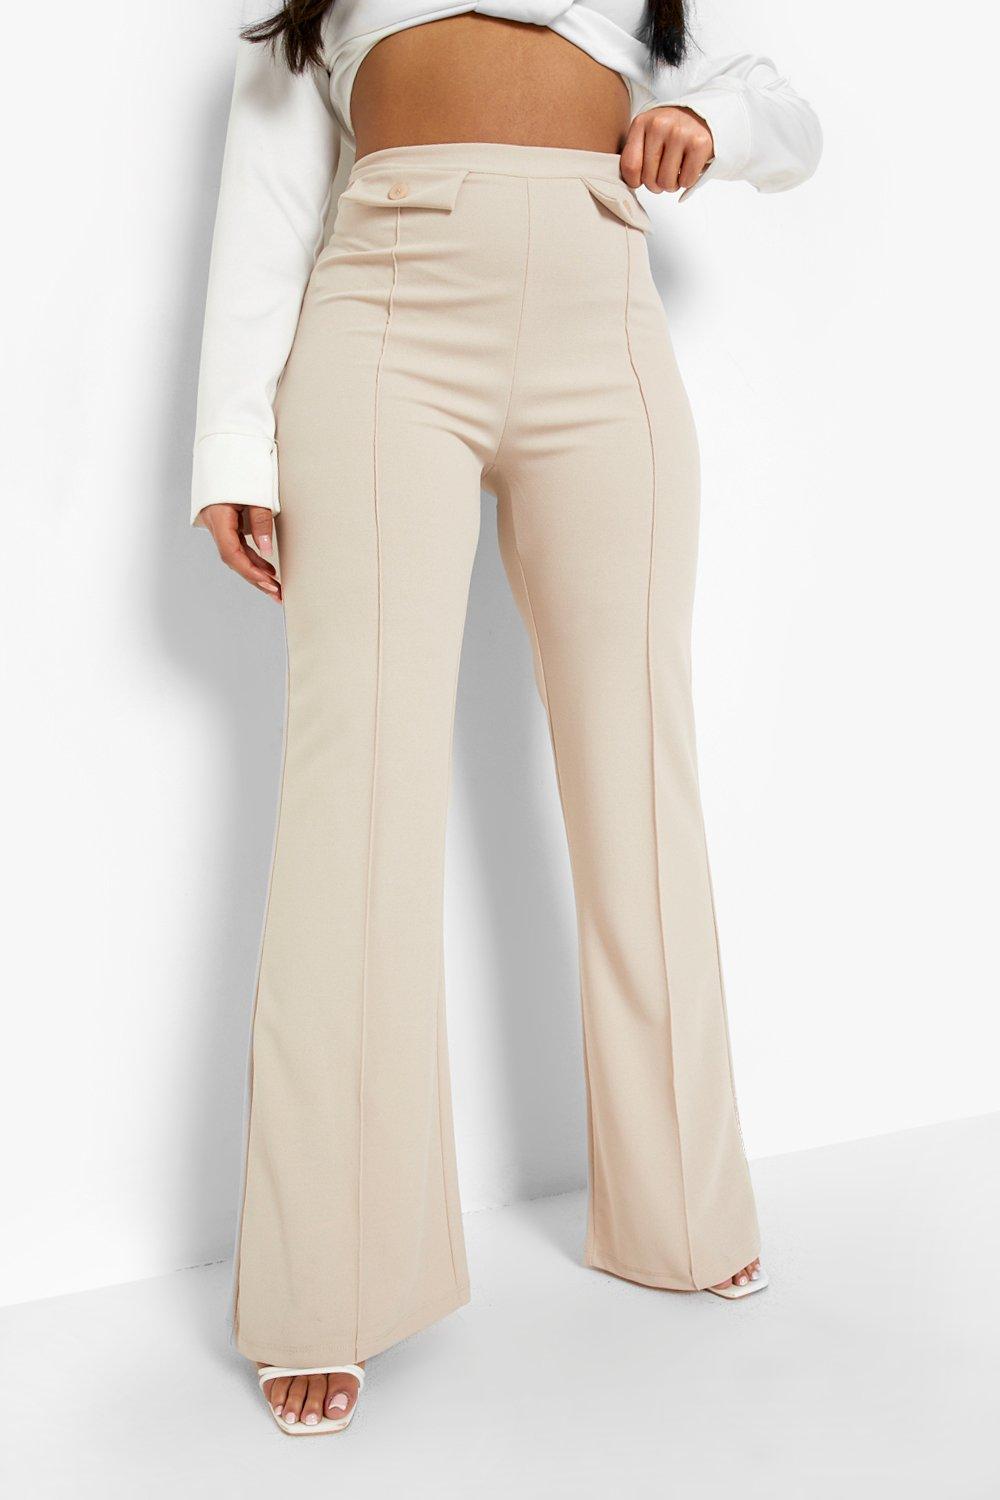 Le Soleil High Waisted Trousers - Boogzel Clothing